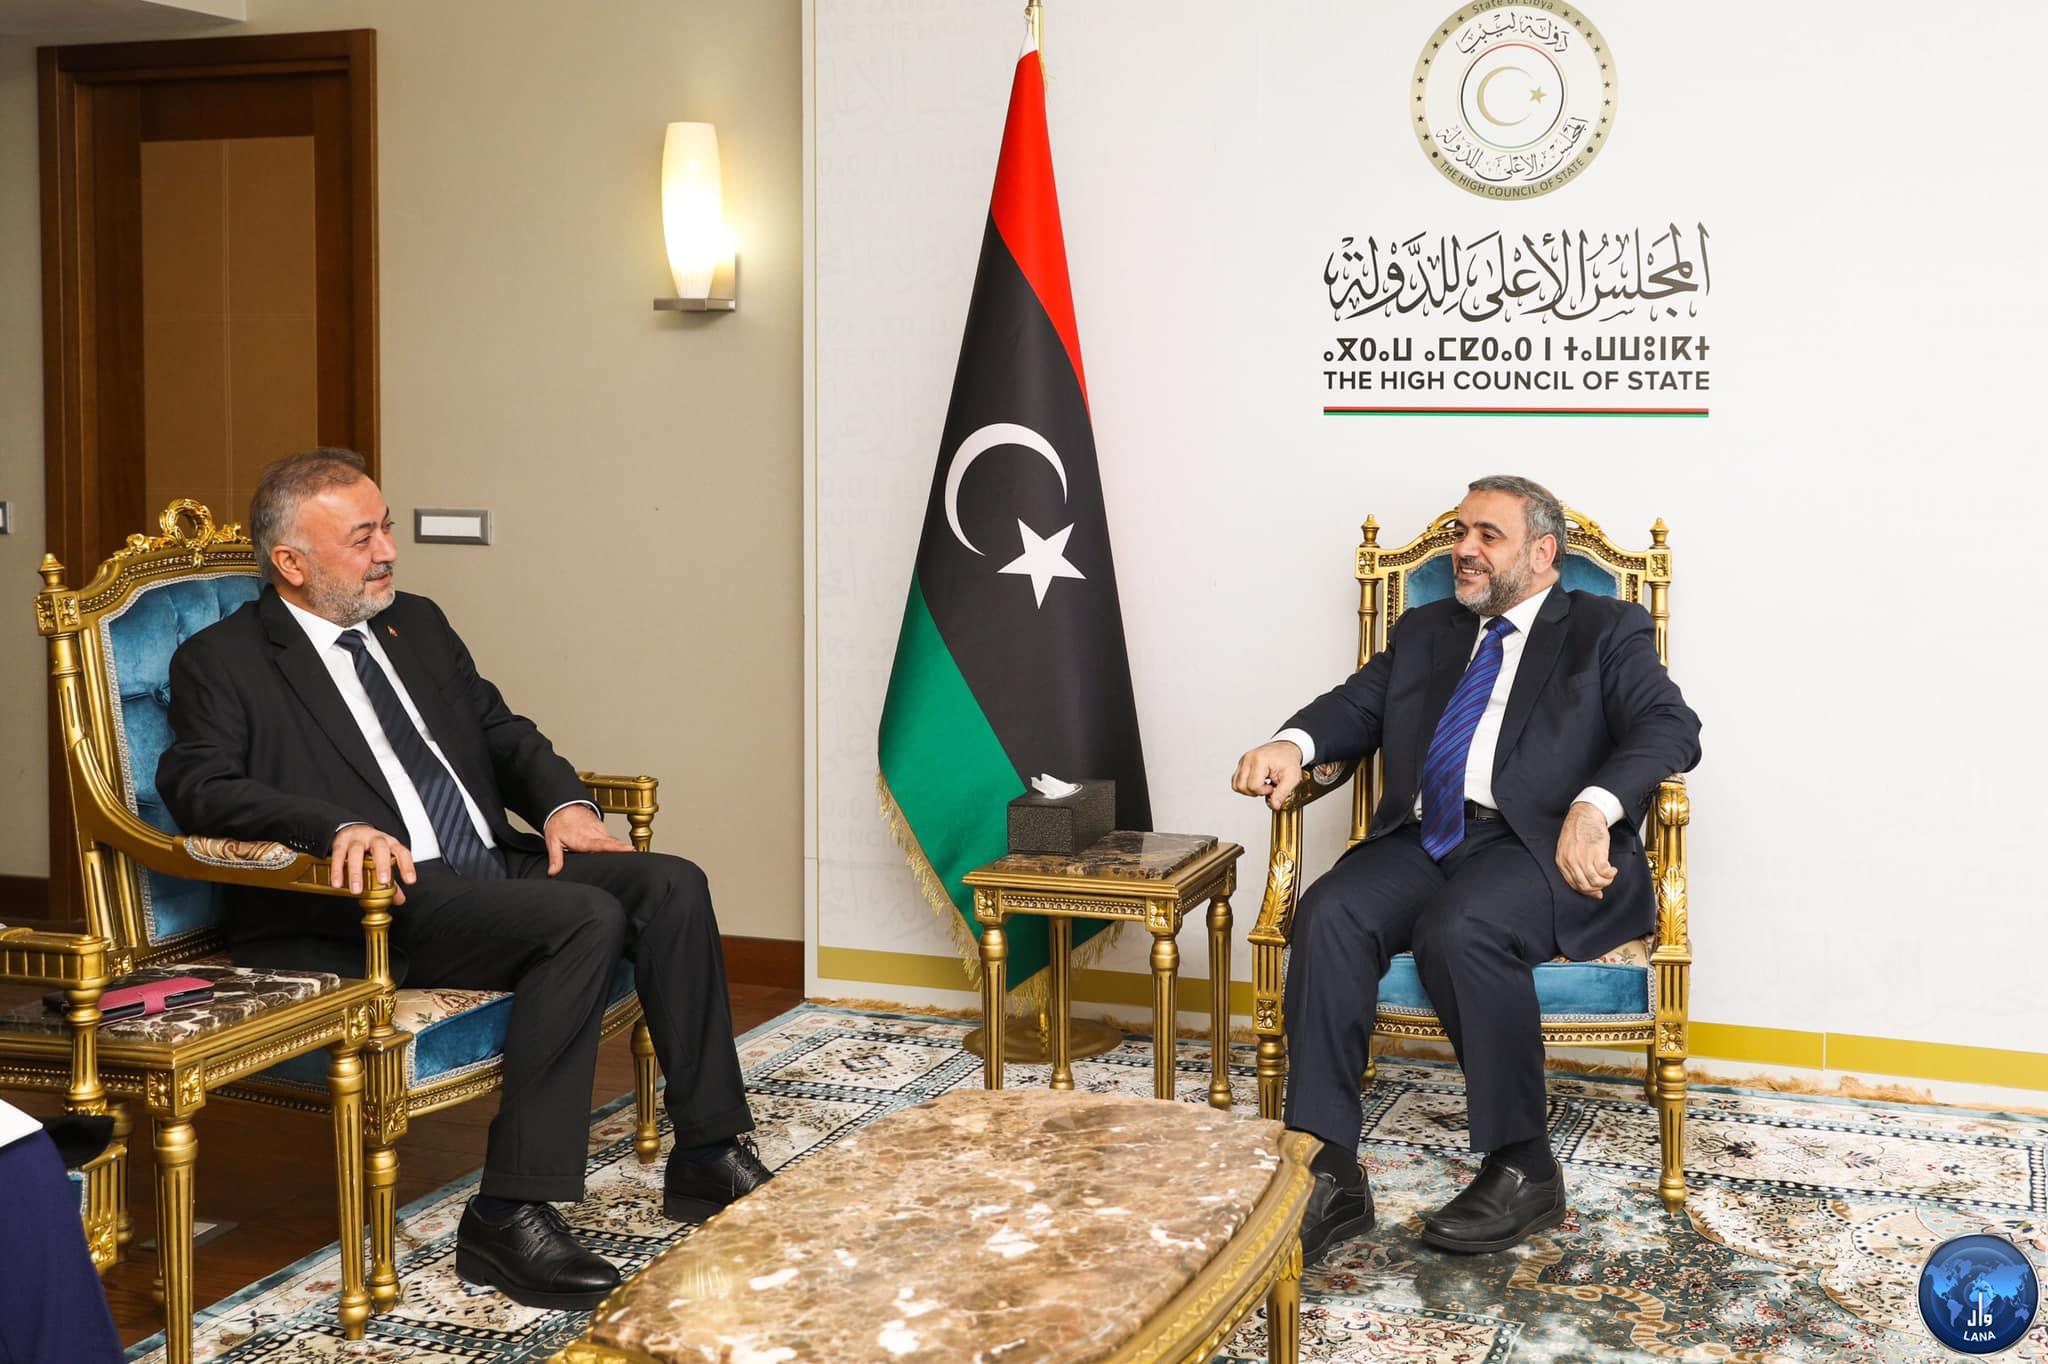 President of High Council of State meets with Turkish ambassador to Libya.